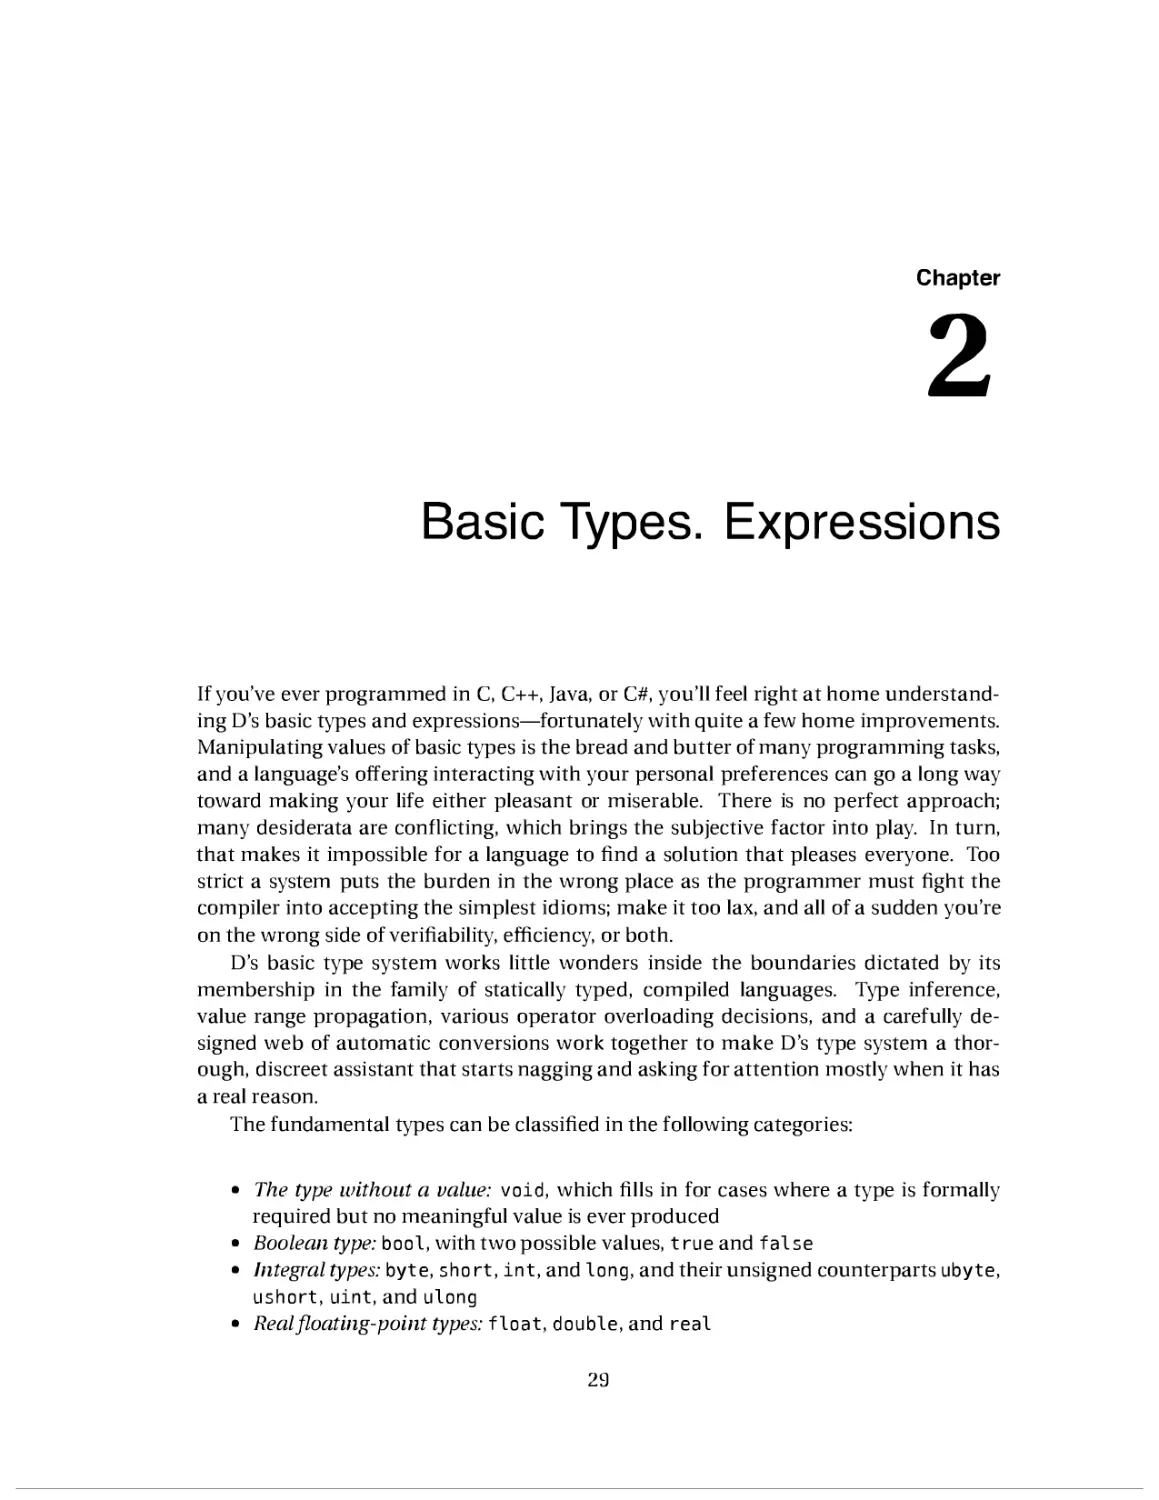 2. Basic Types. Expressions